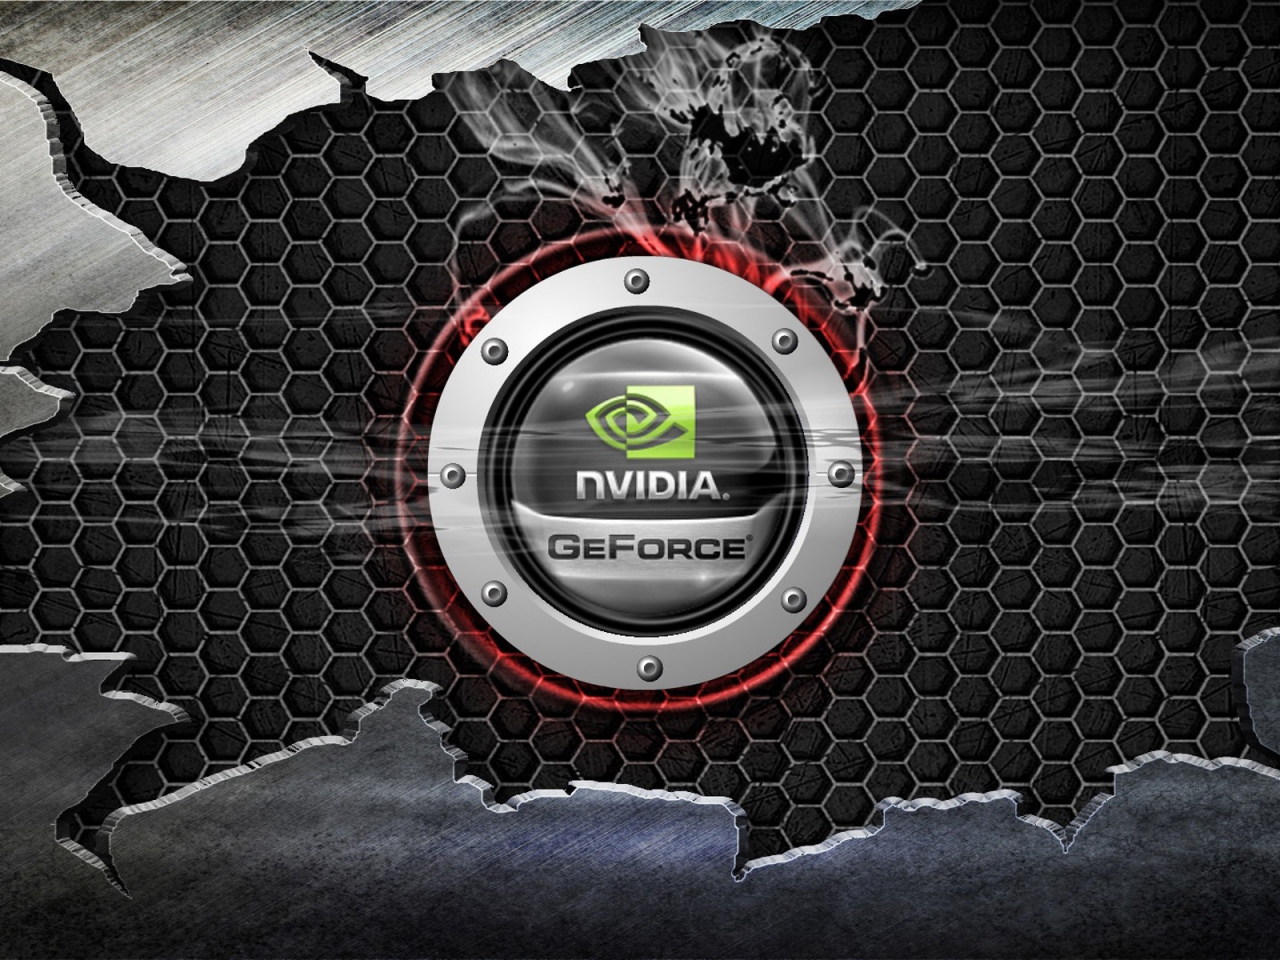 nVIDIA for 1280 x 960 resolution